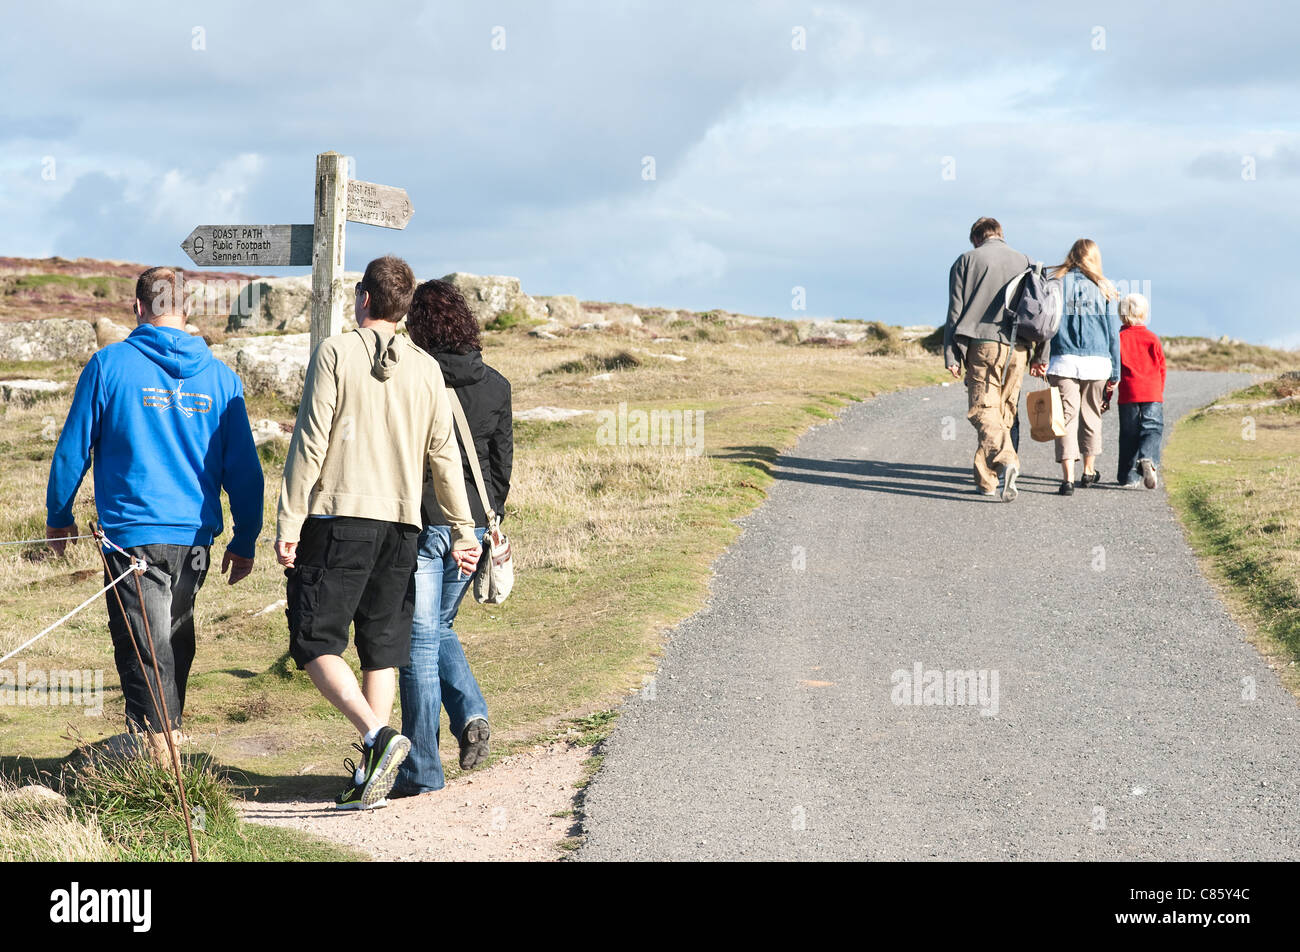 August 2011  -Lands End, Cornwall, UK - Walkers on wild landscape Stock Photo